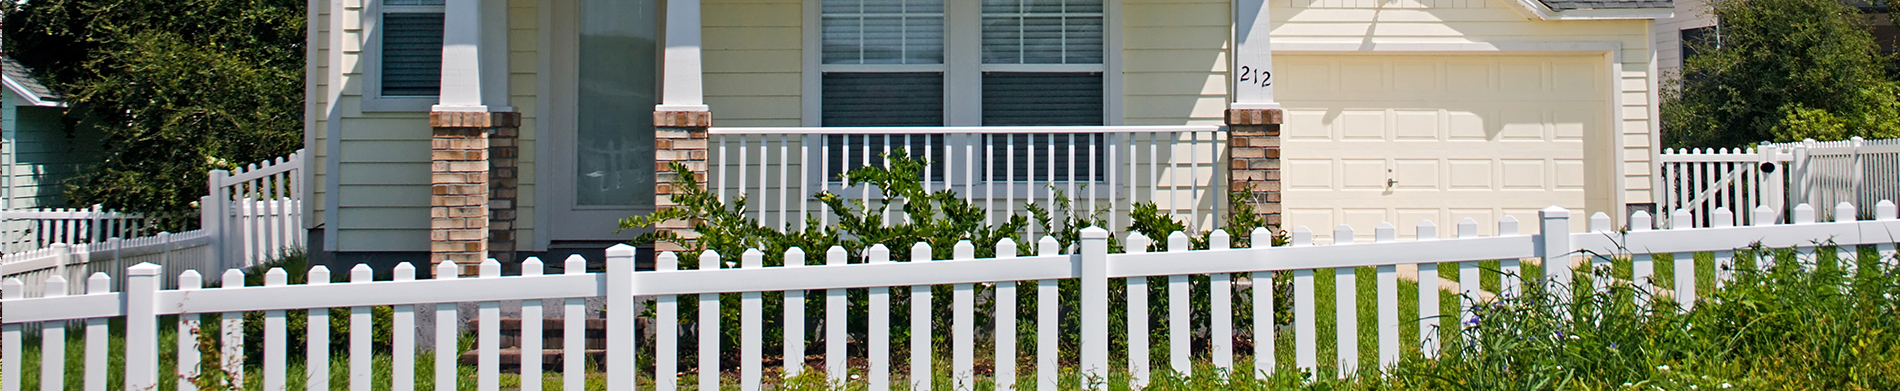 Are You Considering a Front Yard Fence?